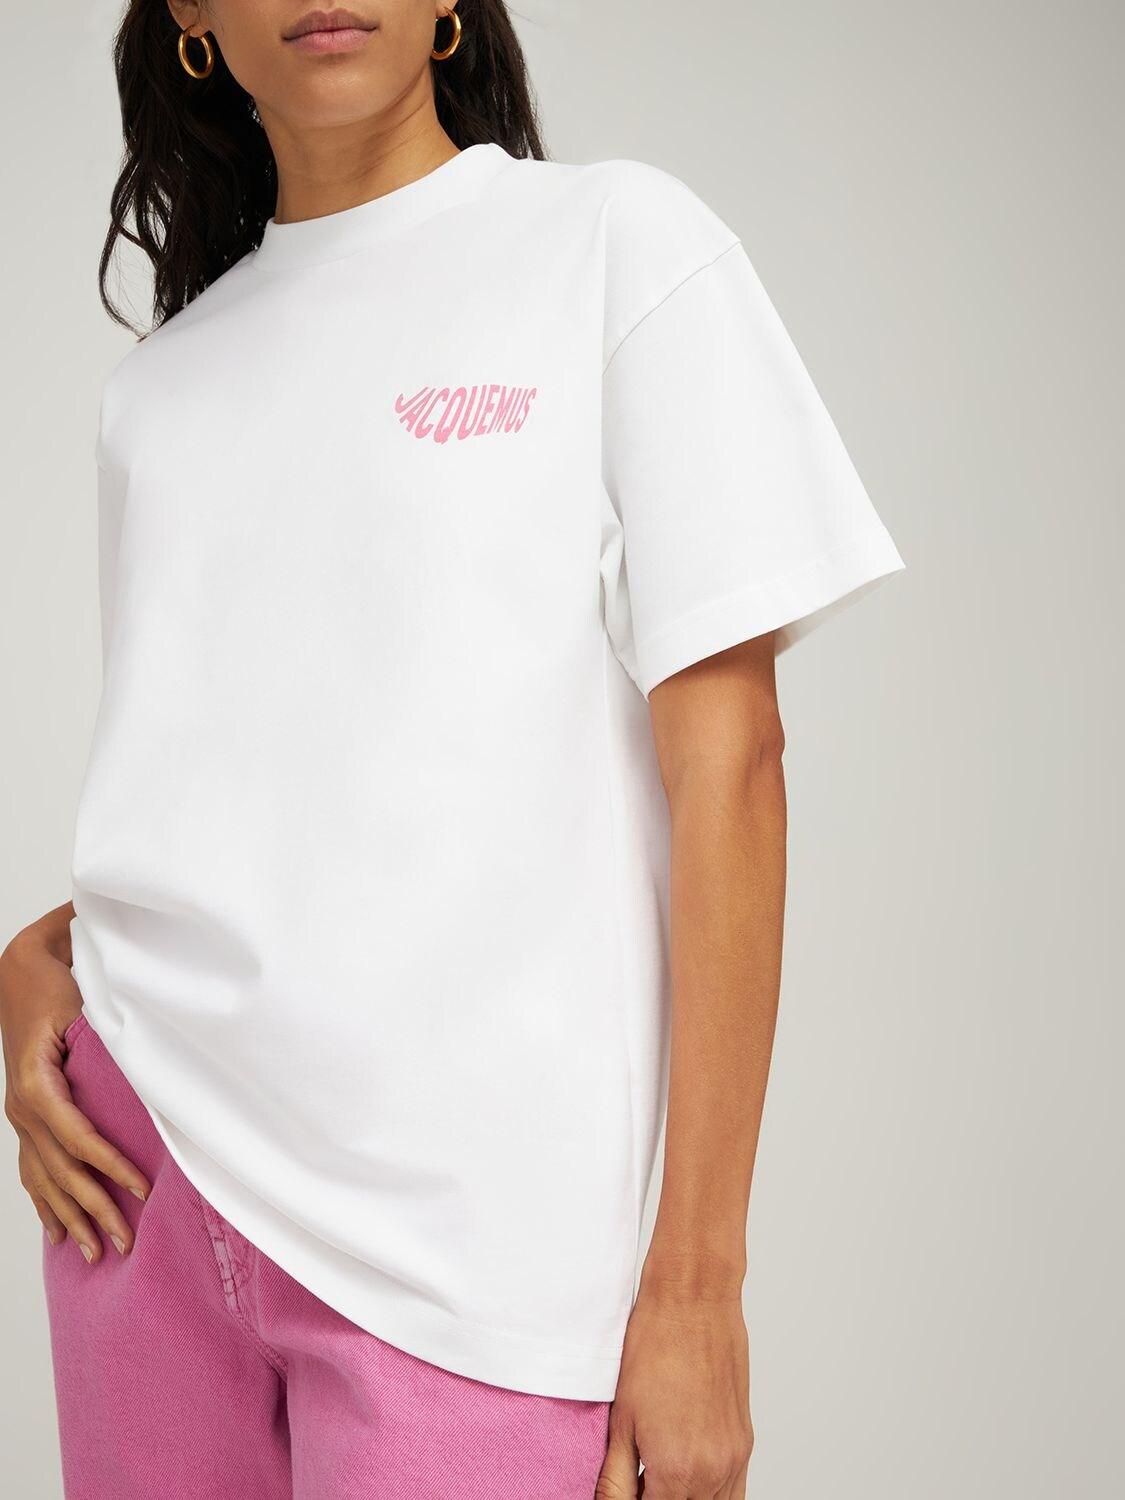 Top Le T-shirt Vague In Jersey Di Cotone di Jacquemus in Bianco | Lyst